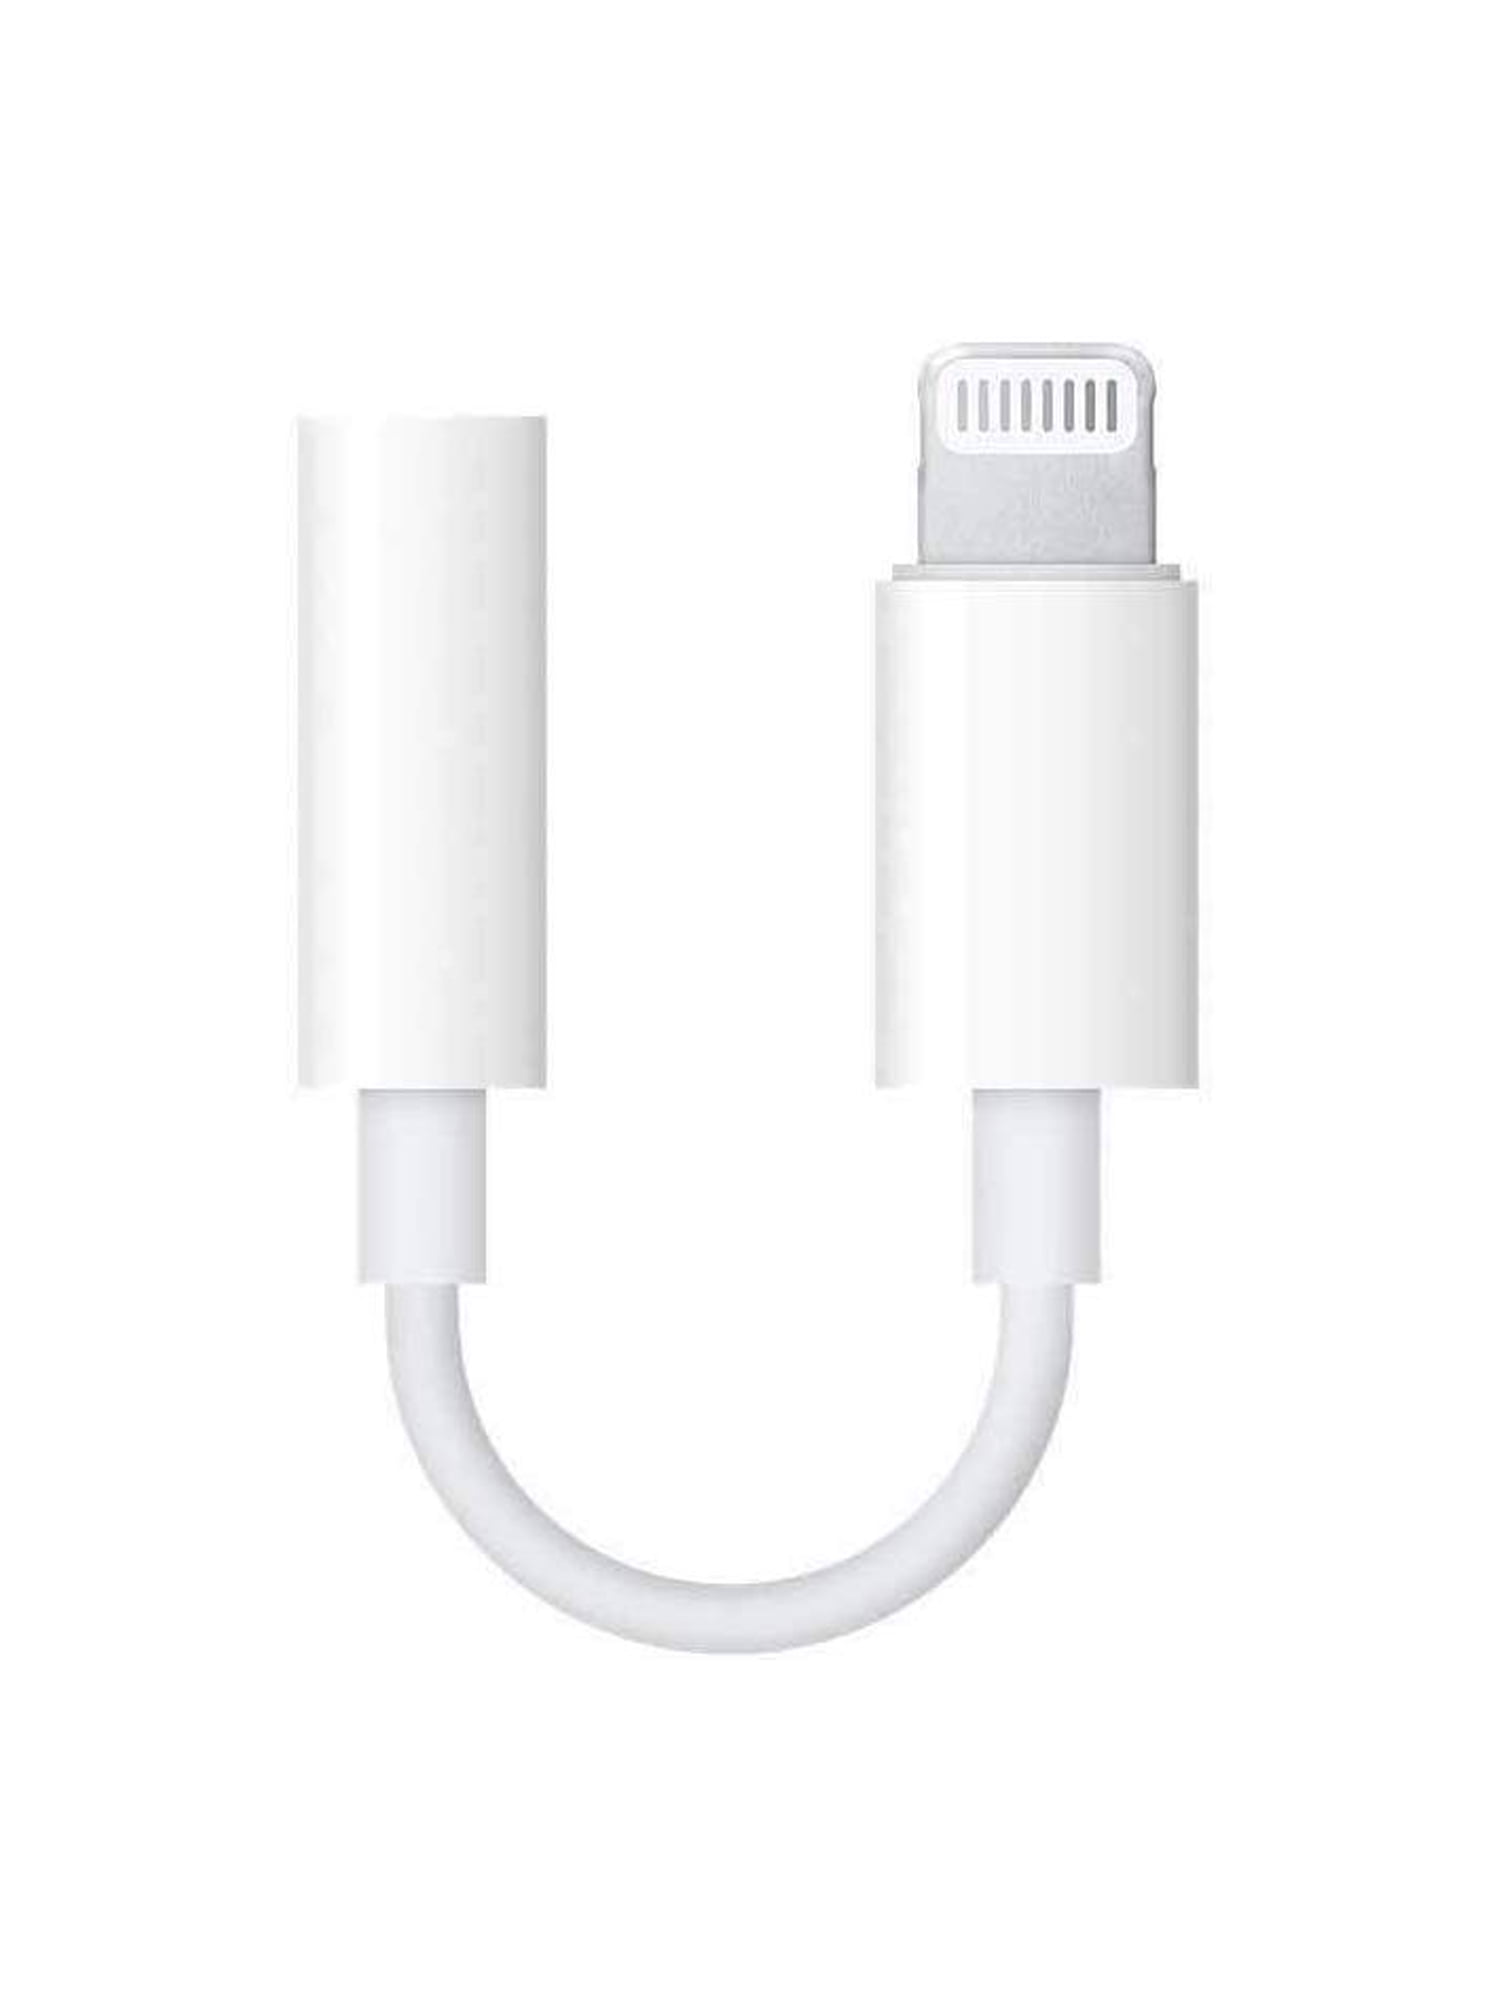 where can i buy an iphone headphone adapter